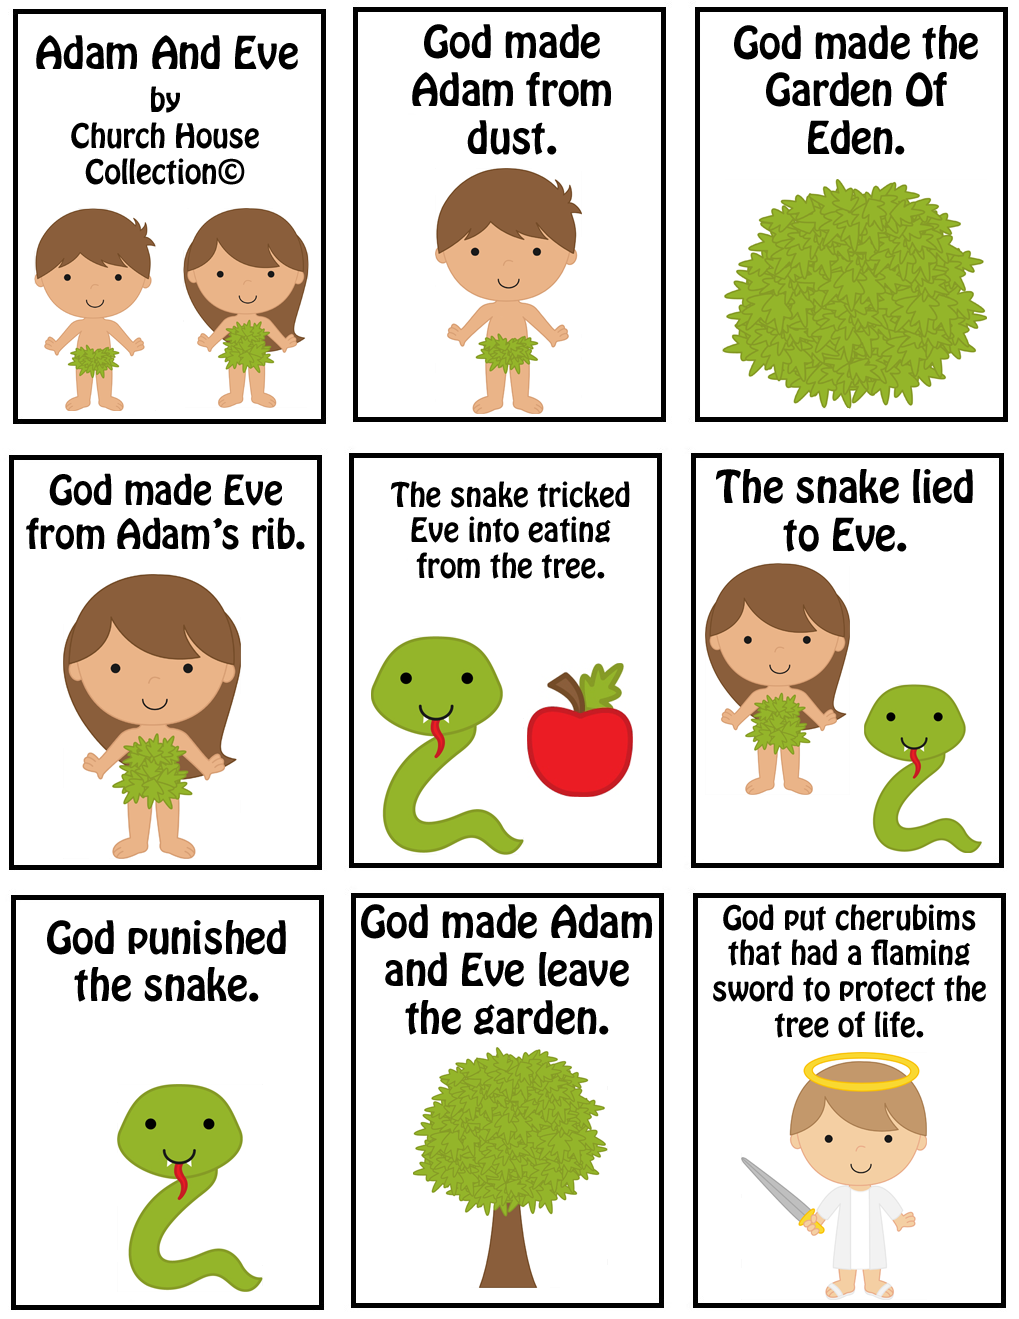 church-house-collection-blog-free-adam-and-eve-mini-booklet-printable